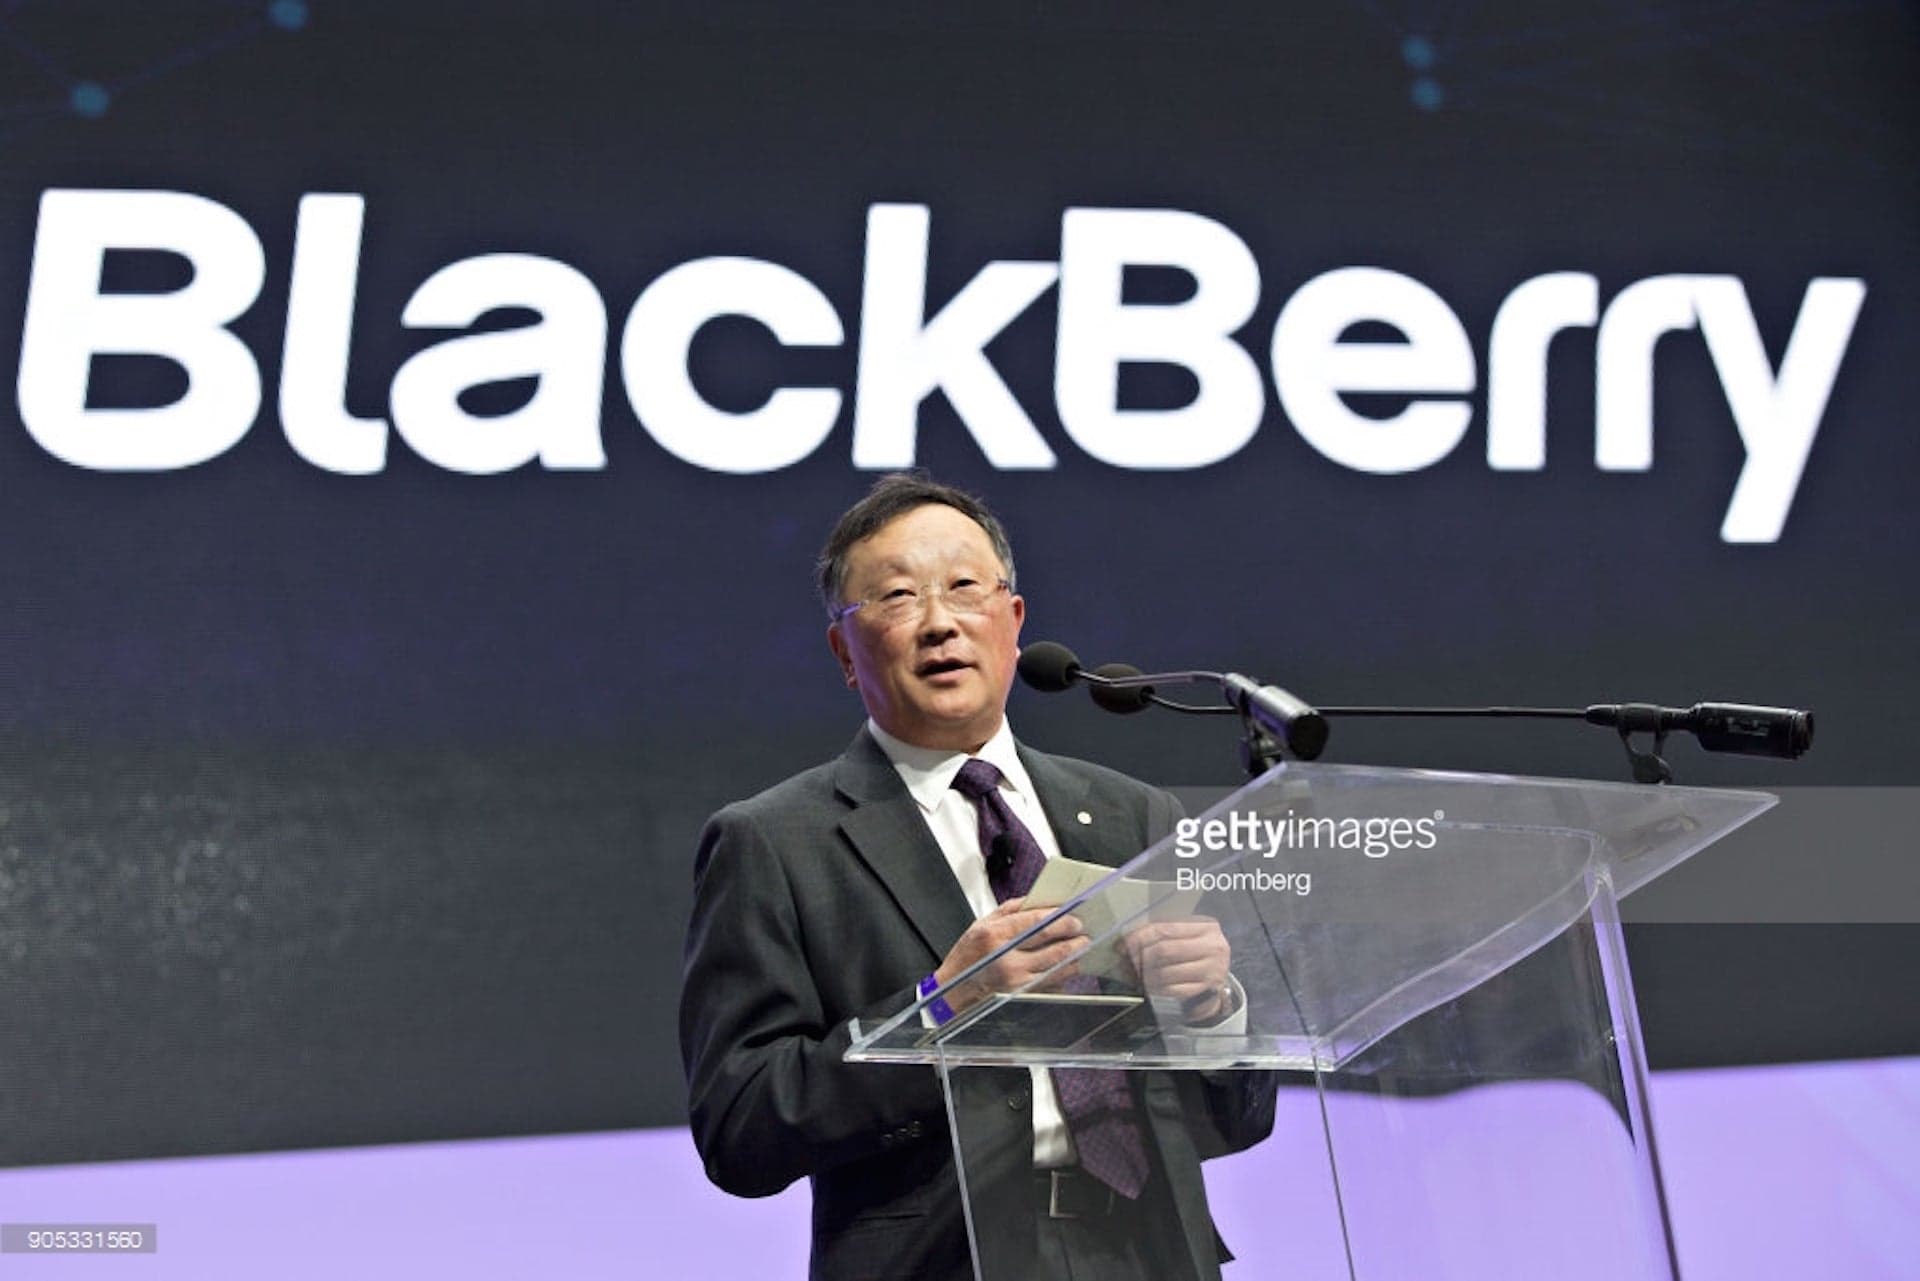 At the Detroit Auto Show, Blackberry CEO John Chen Says Company’s Future is in Car Tech